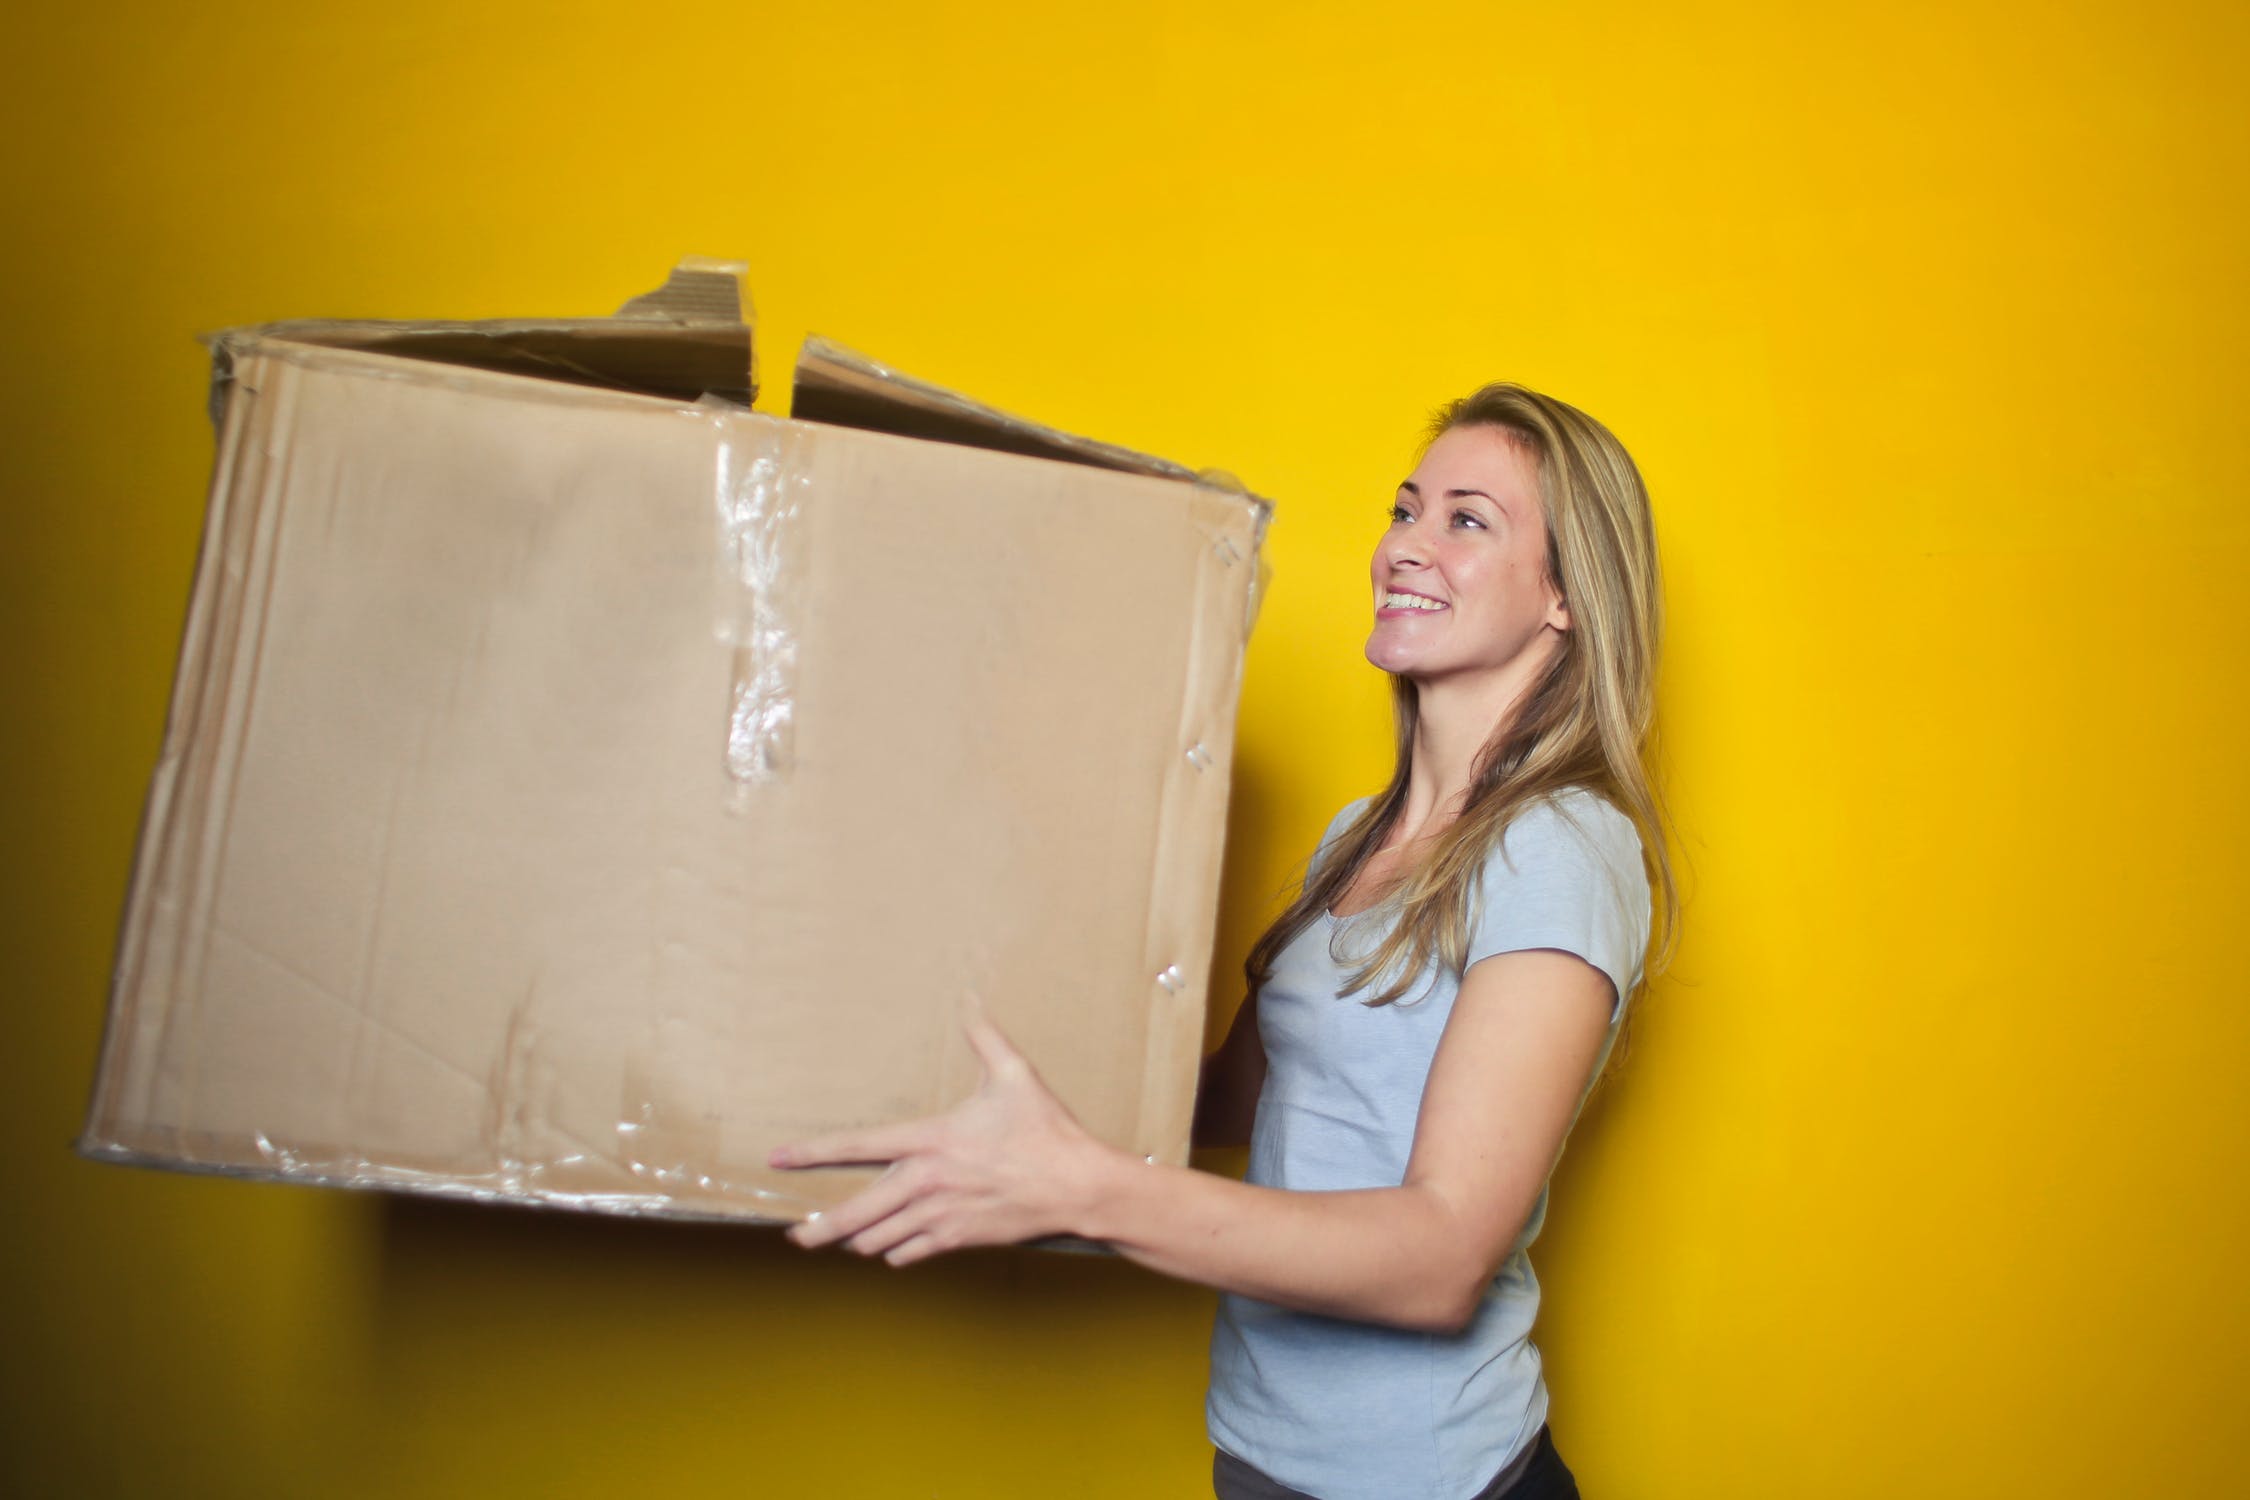 How Removals Take the Stress Out of the Move